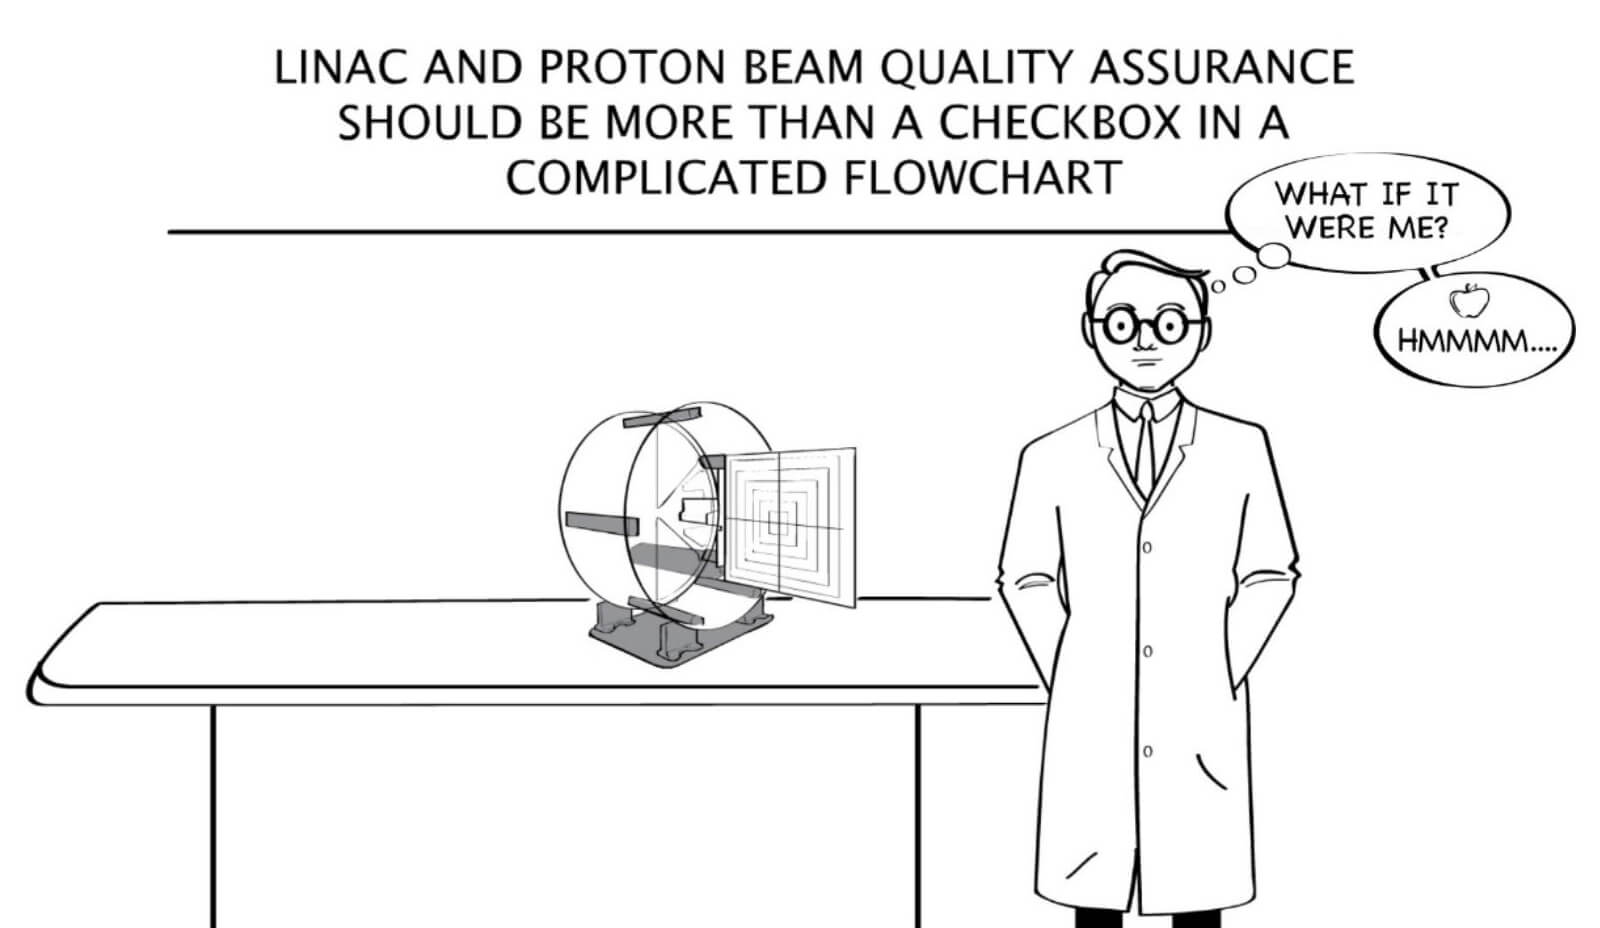 Linac and proton beam quality assurance should be more than a checkbox in a complicated flowchart.